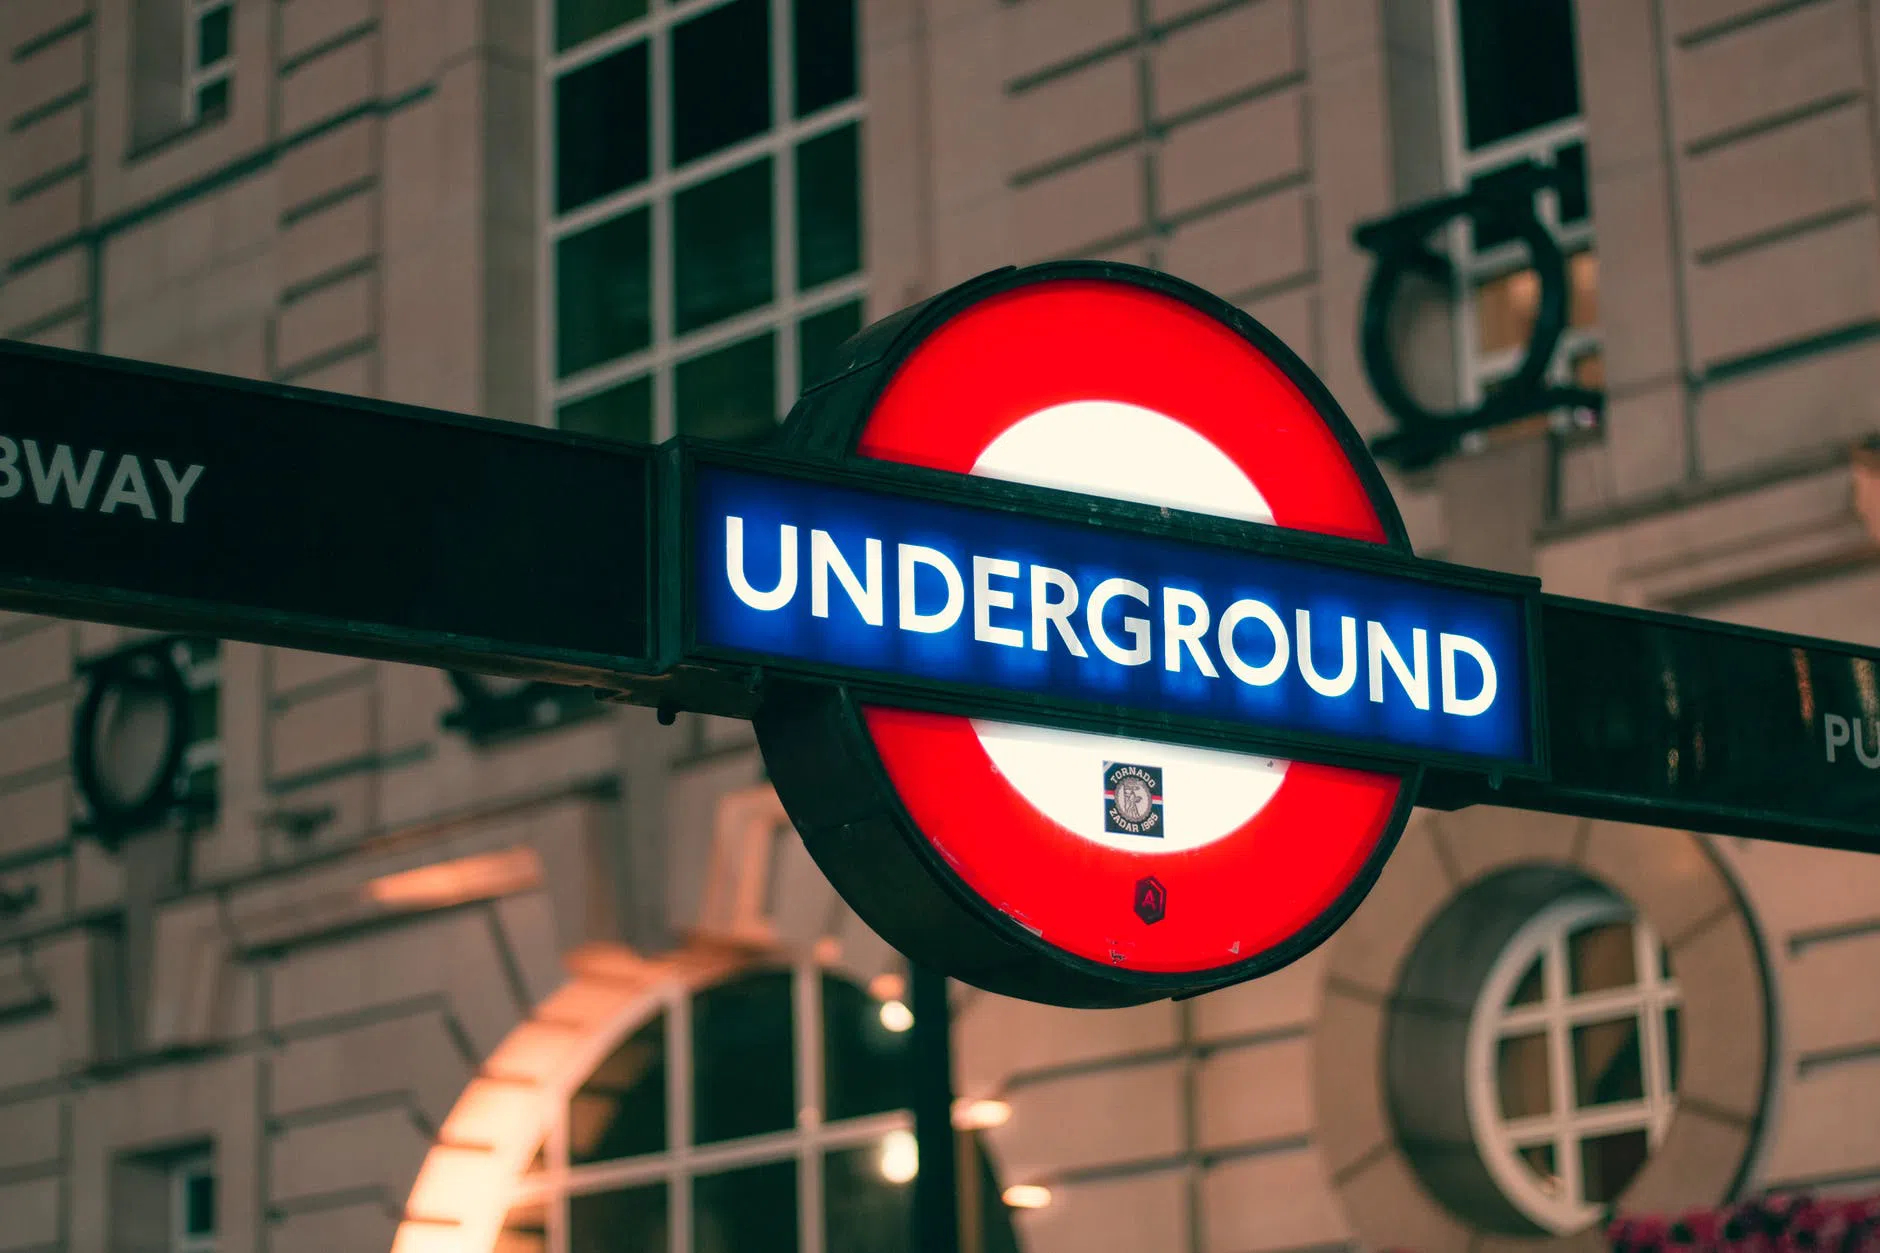 A Guide to the London Underground